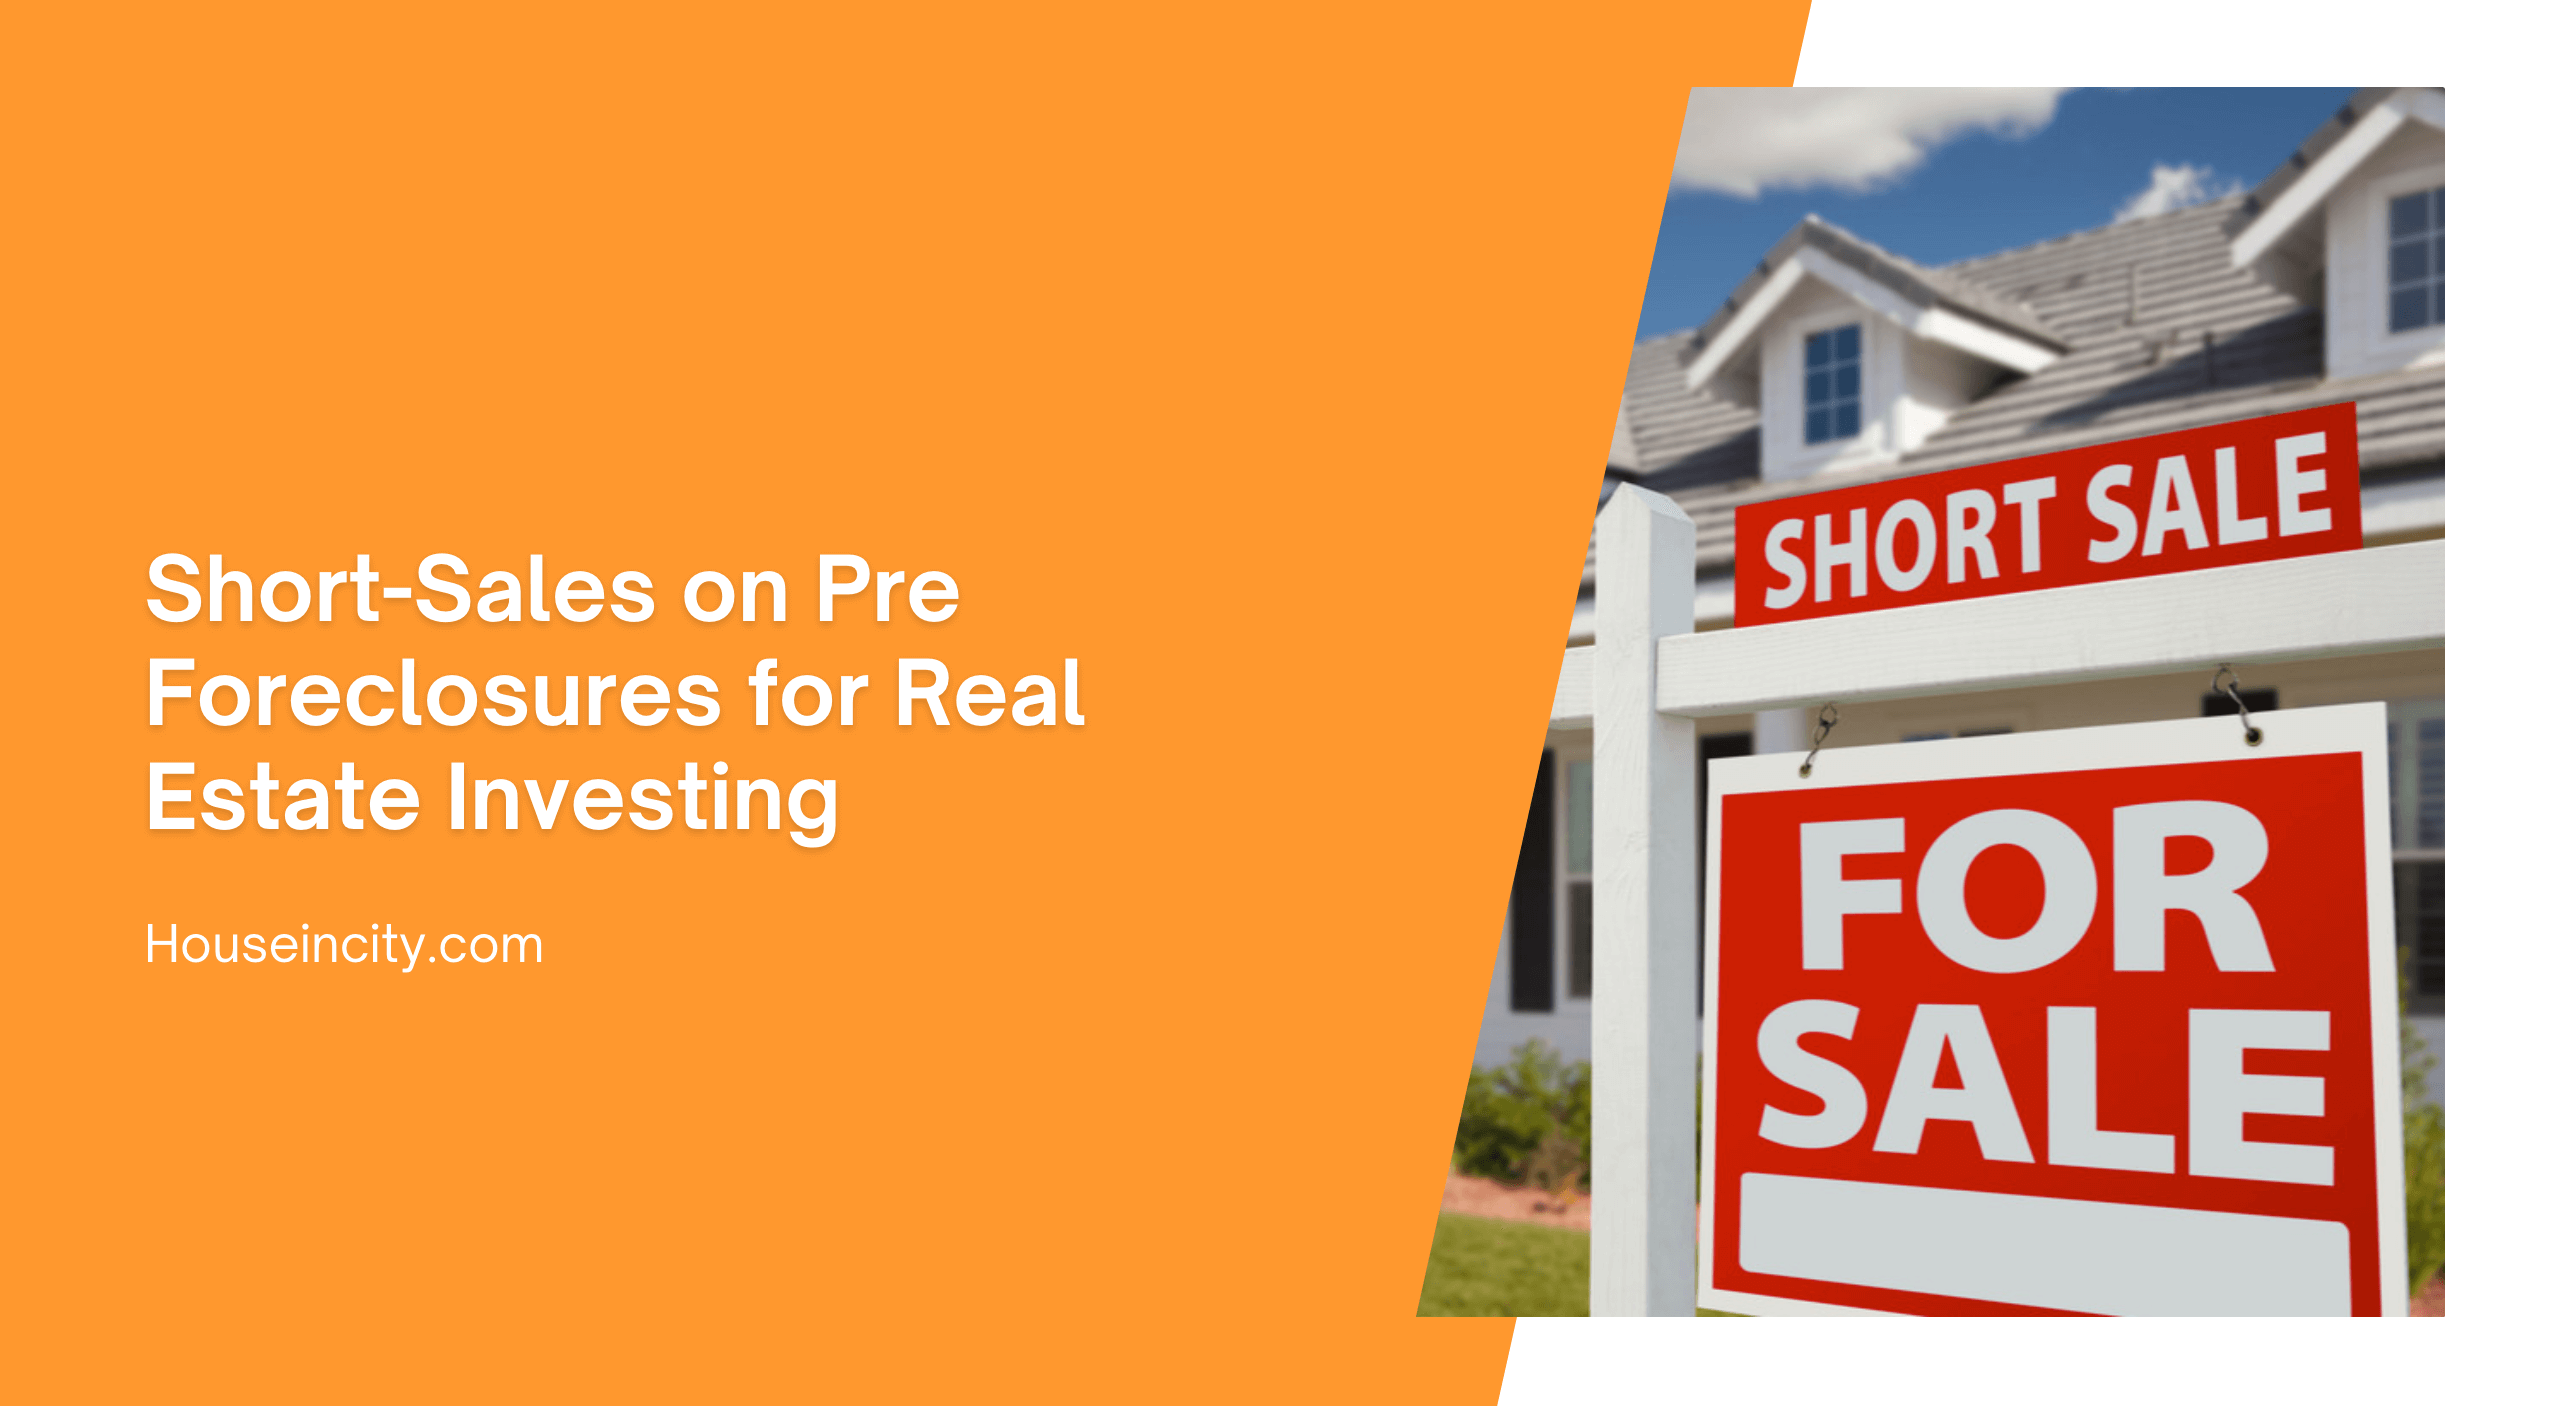 Short-Sales on Pre Foreclosures for Real Estate Investing